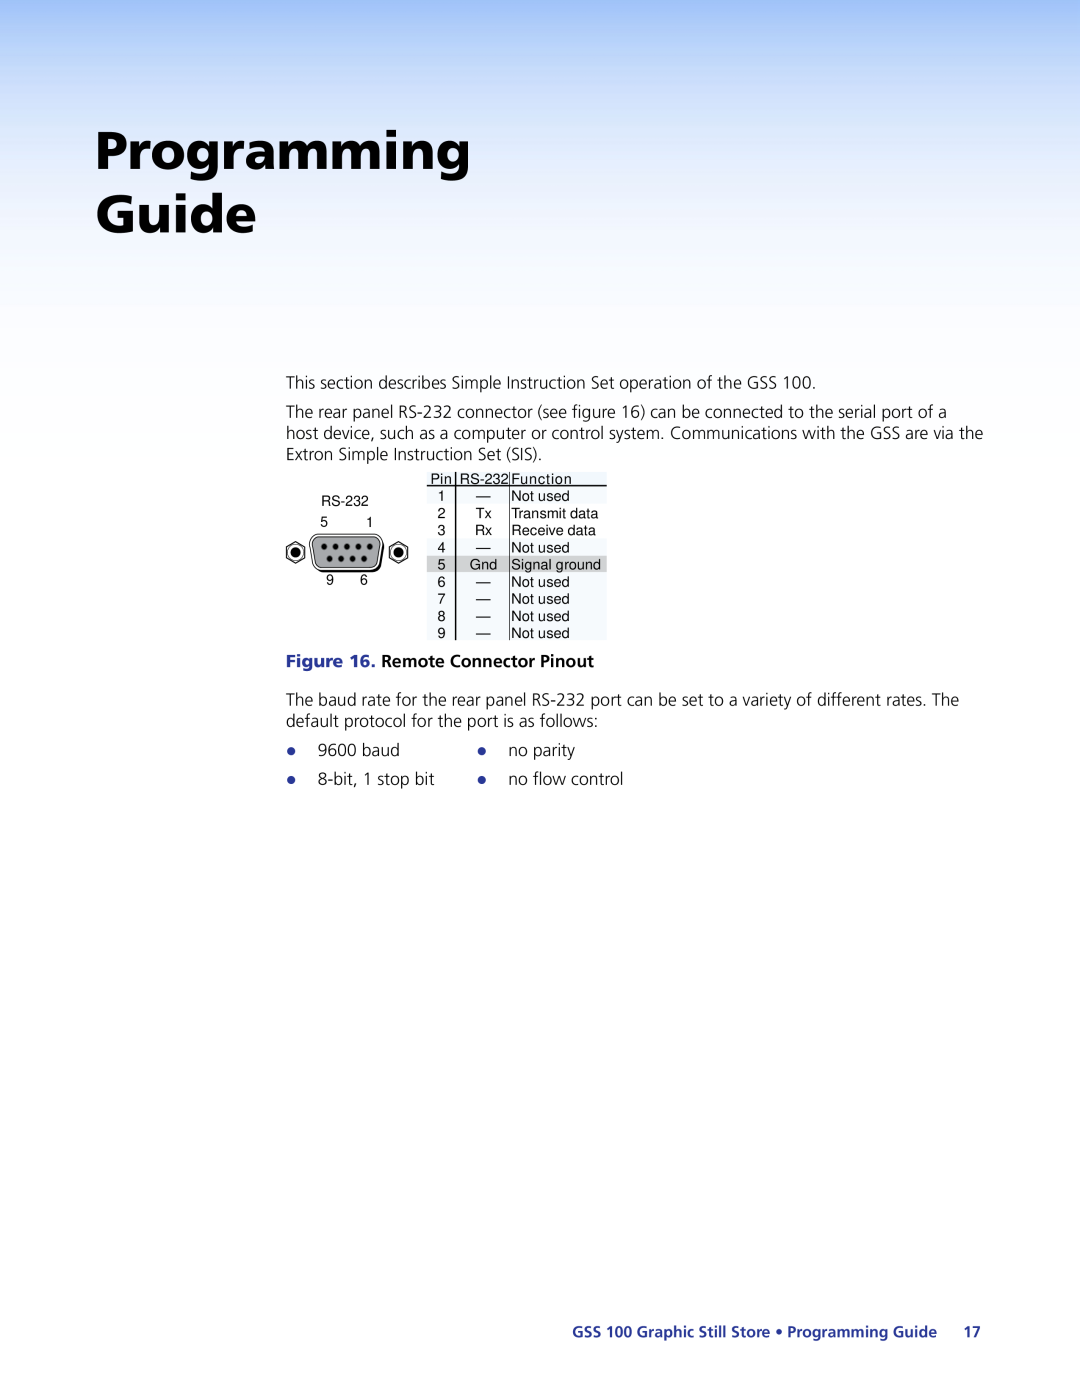 Extron electronic GSS 100 manual Programming Guide, Remote Connector Pinout 